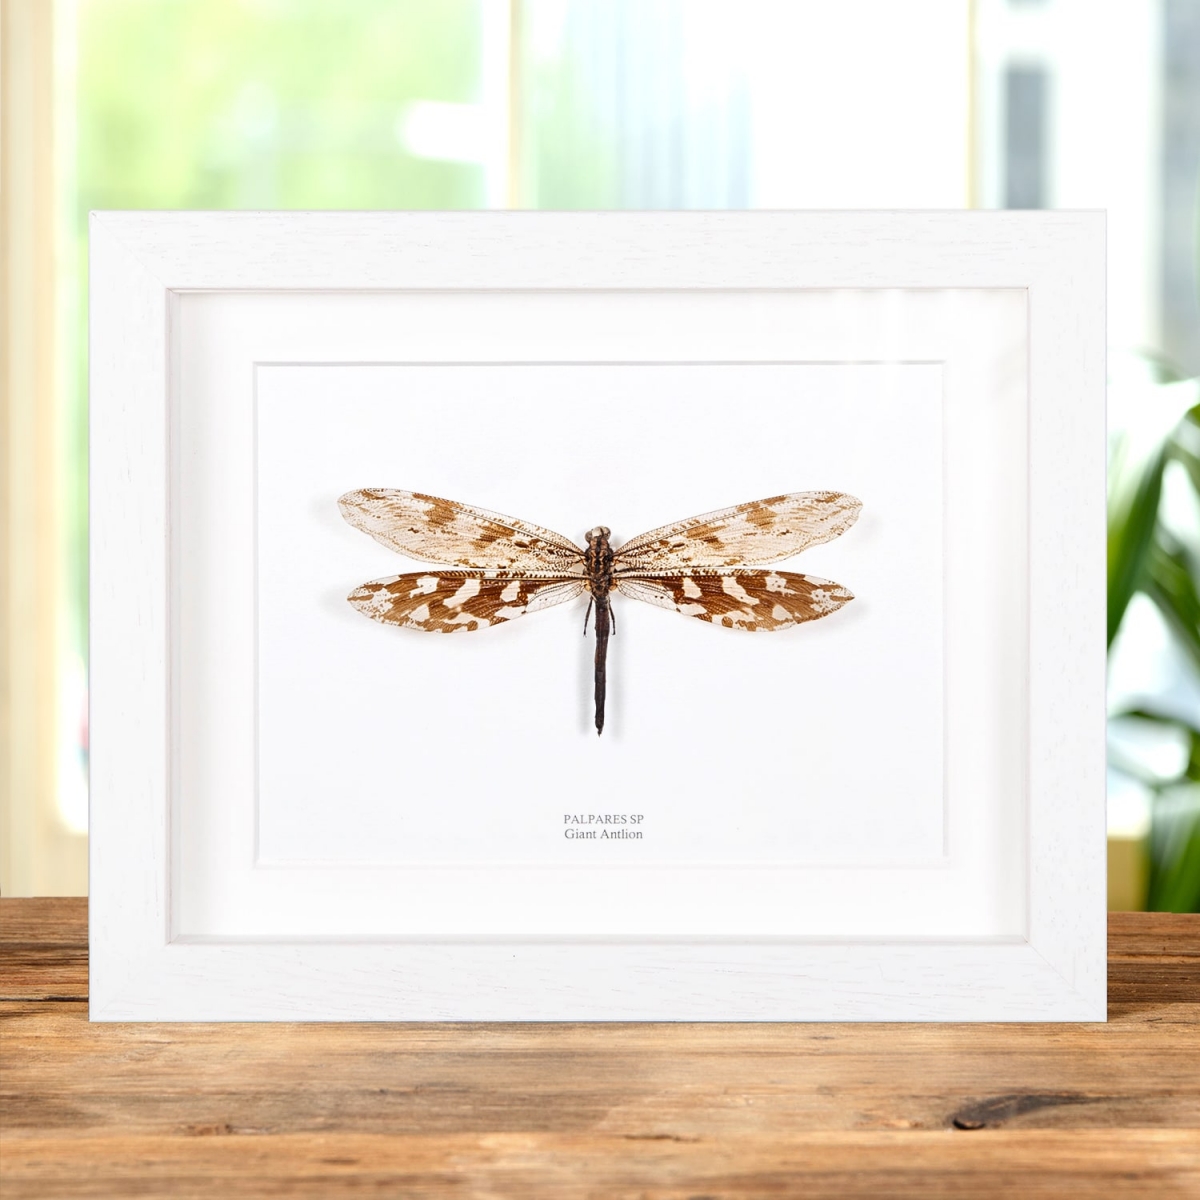 Giant Antlion in Box Frame (Palpares sp.)